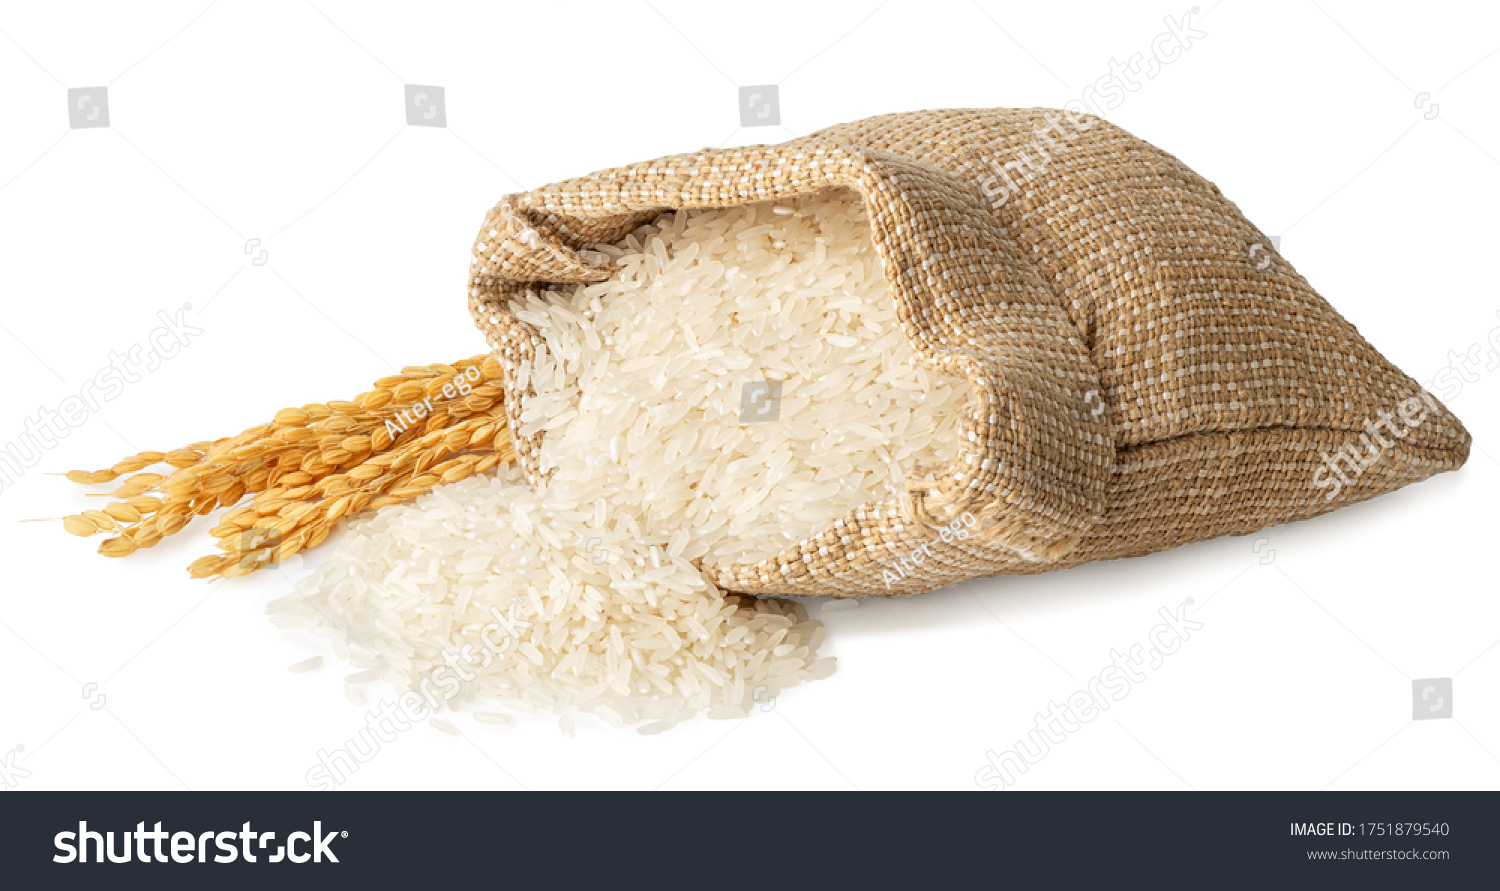 long rice in burlap sack with ears isolated on white background #1751879540